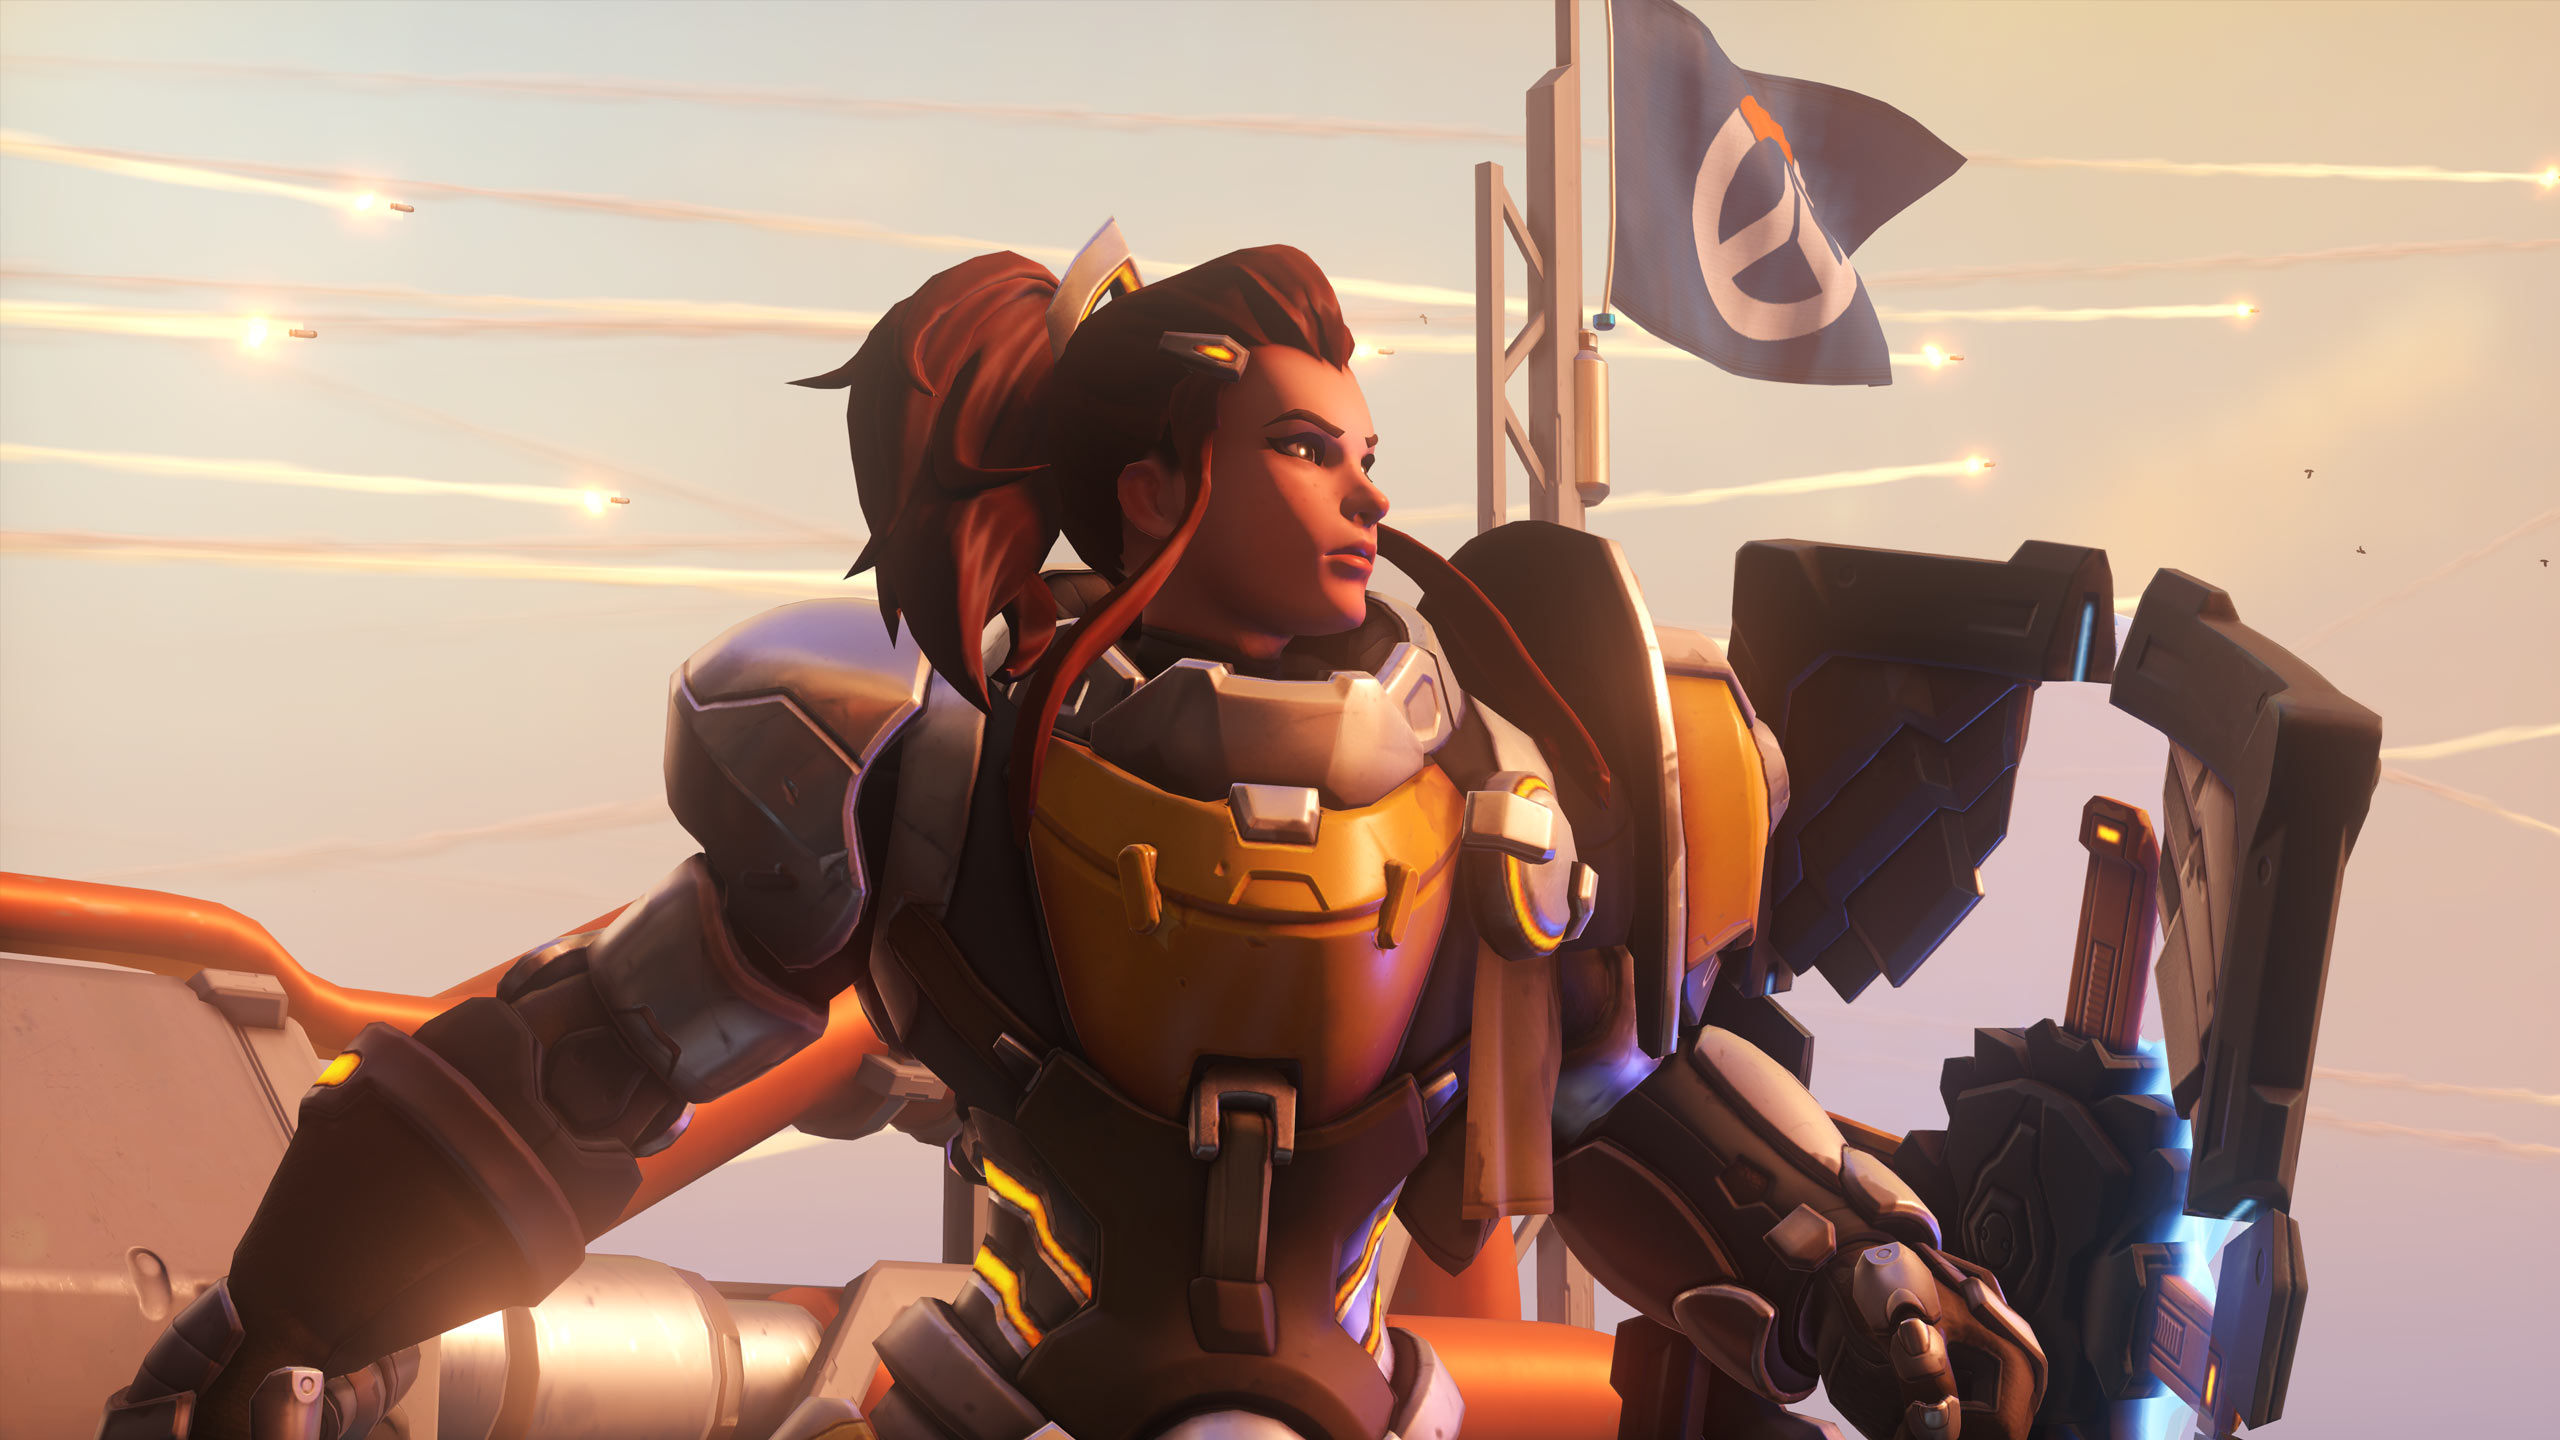 Brigitte S Shield Bash Will Likely Get A Nerf In The Next Overwatch Ptr Patch Dot Esports